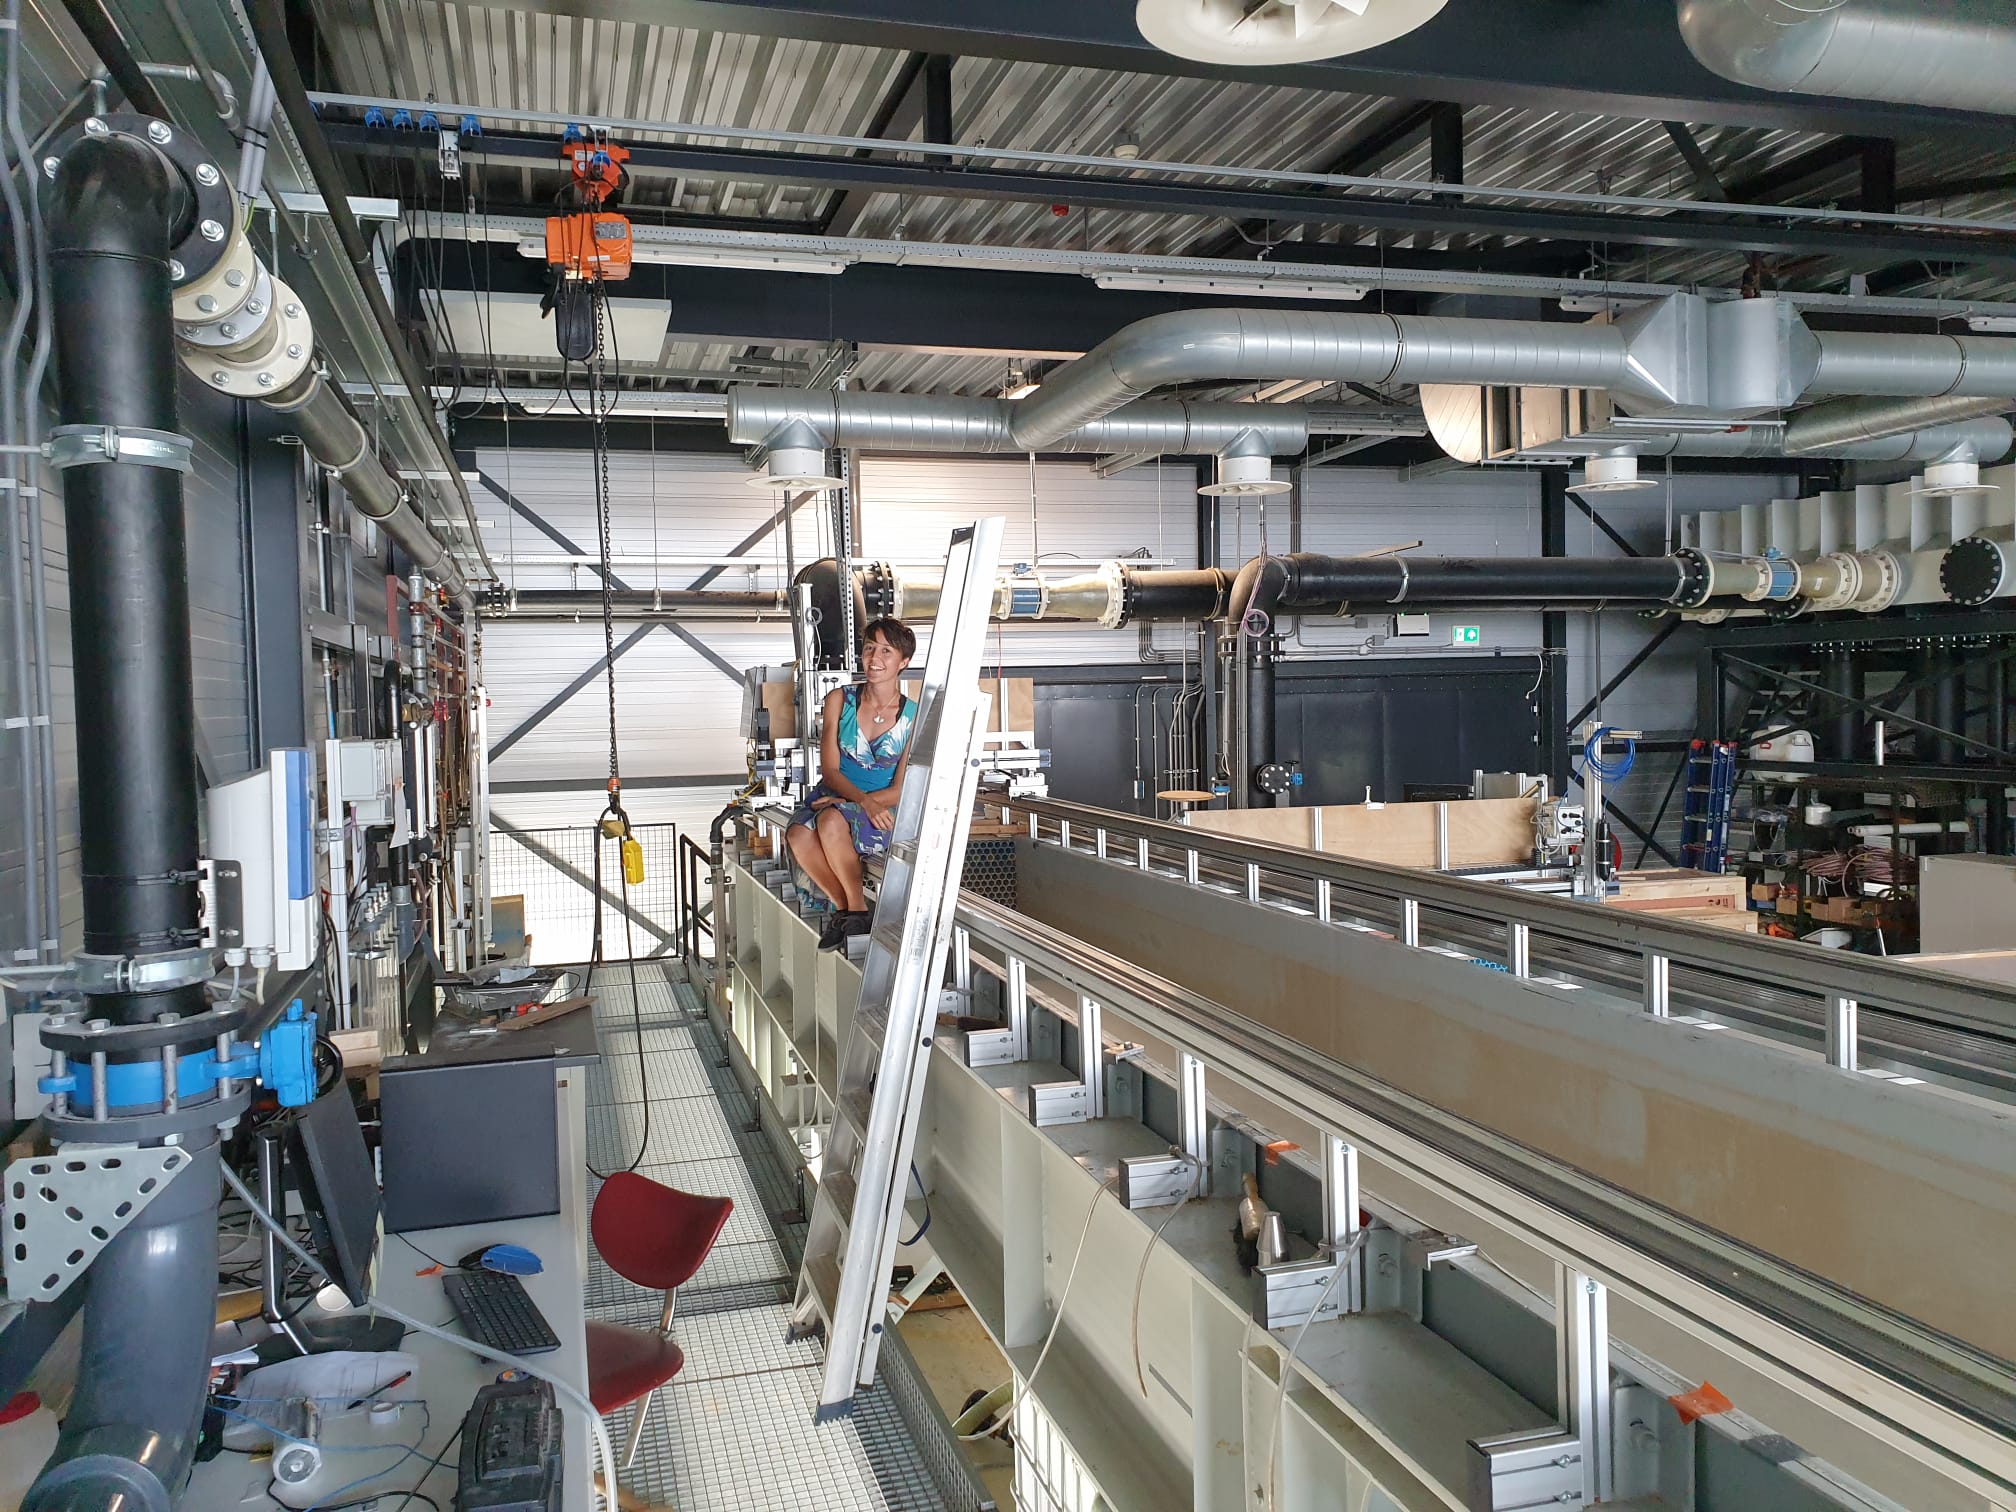 Habitat Stad bloem Scheur Sjoukje de Lange on Twitter: "Soon, this #flume @WURenvironment will be  able to recirculate sediment. This means we will be able to simulate both  bedload and suspended load #sediment transport. This will